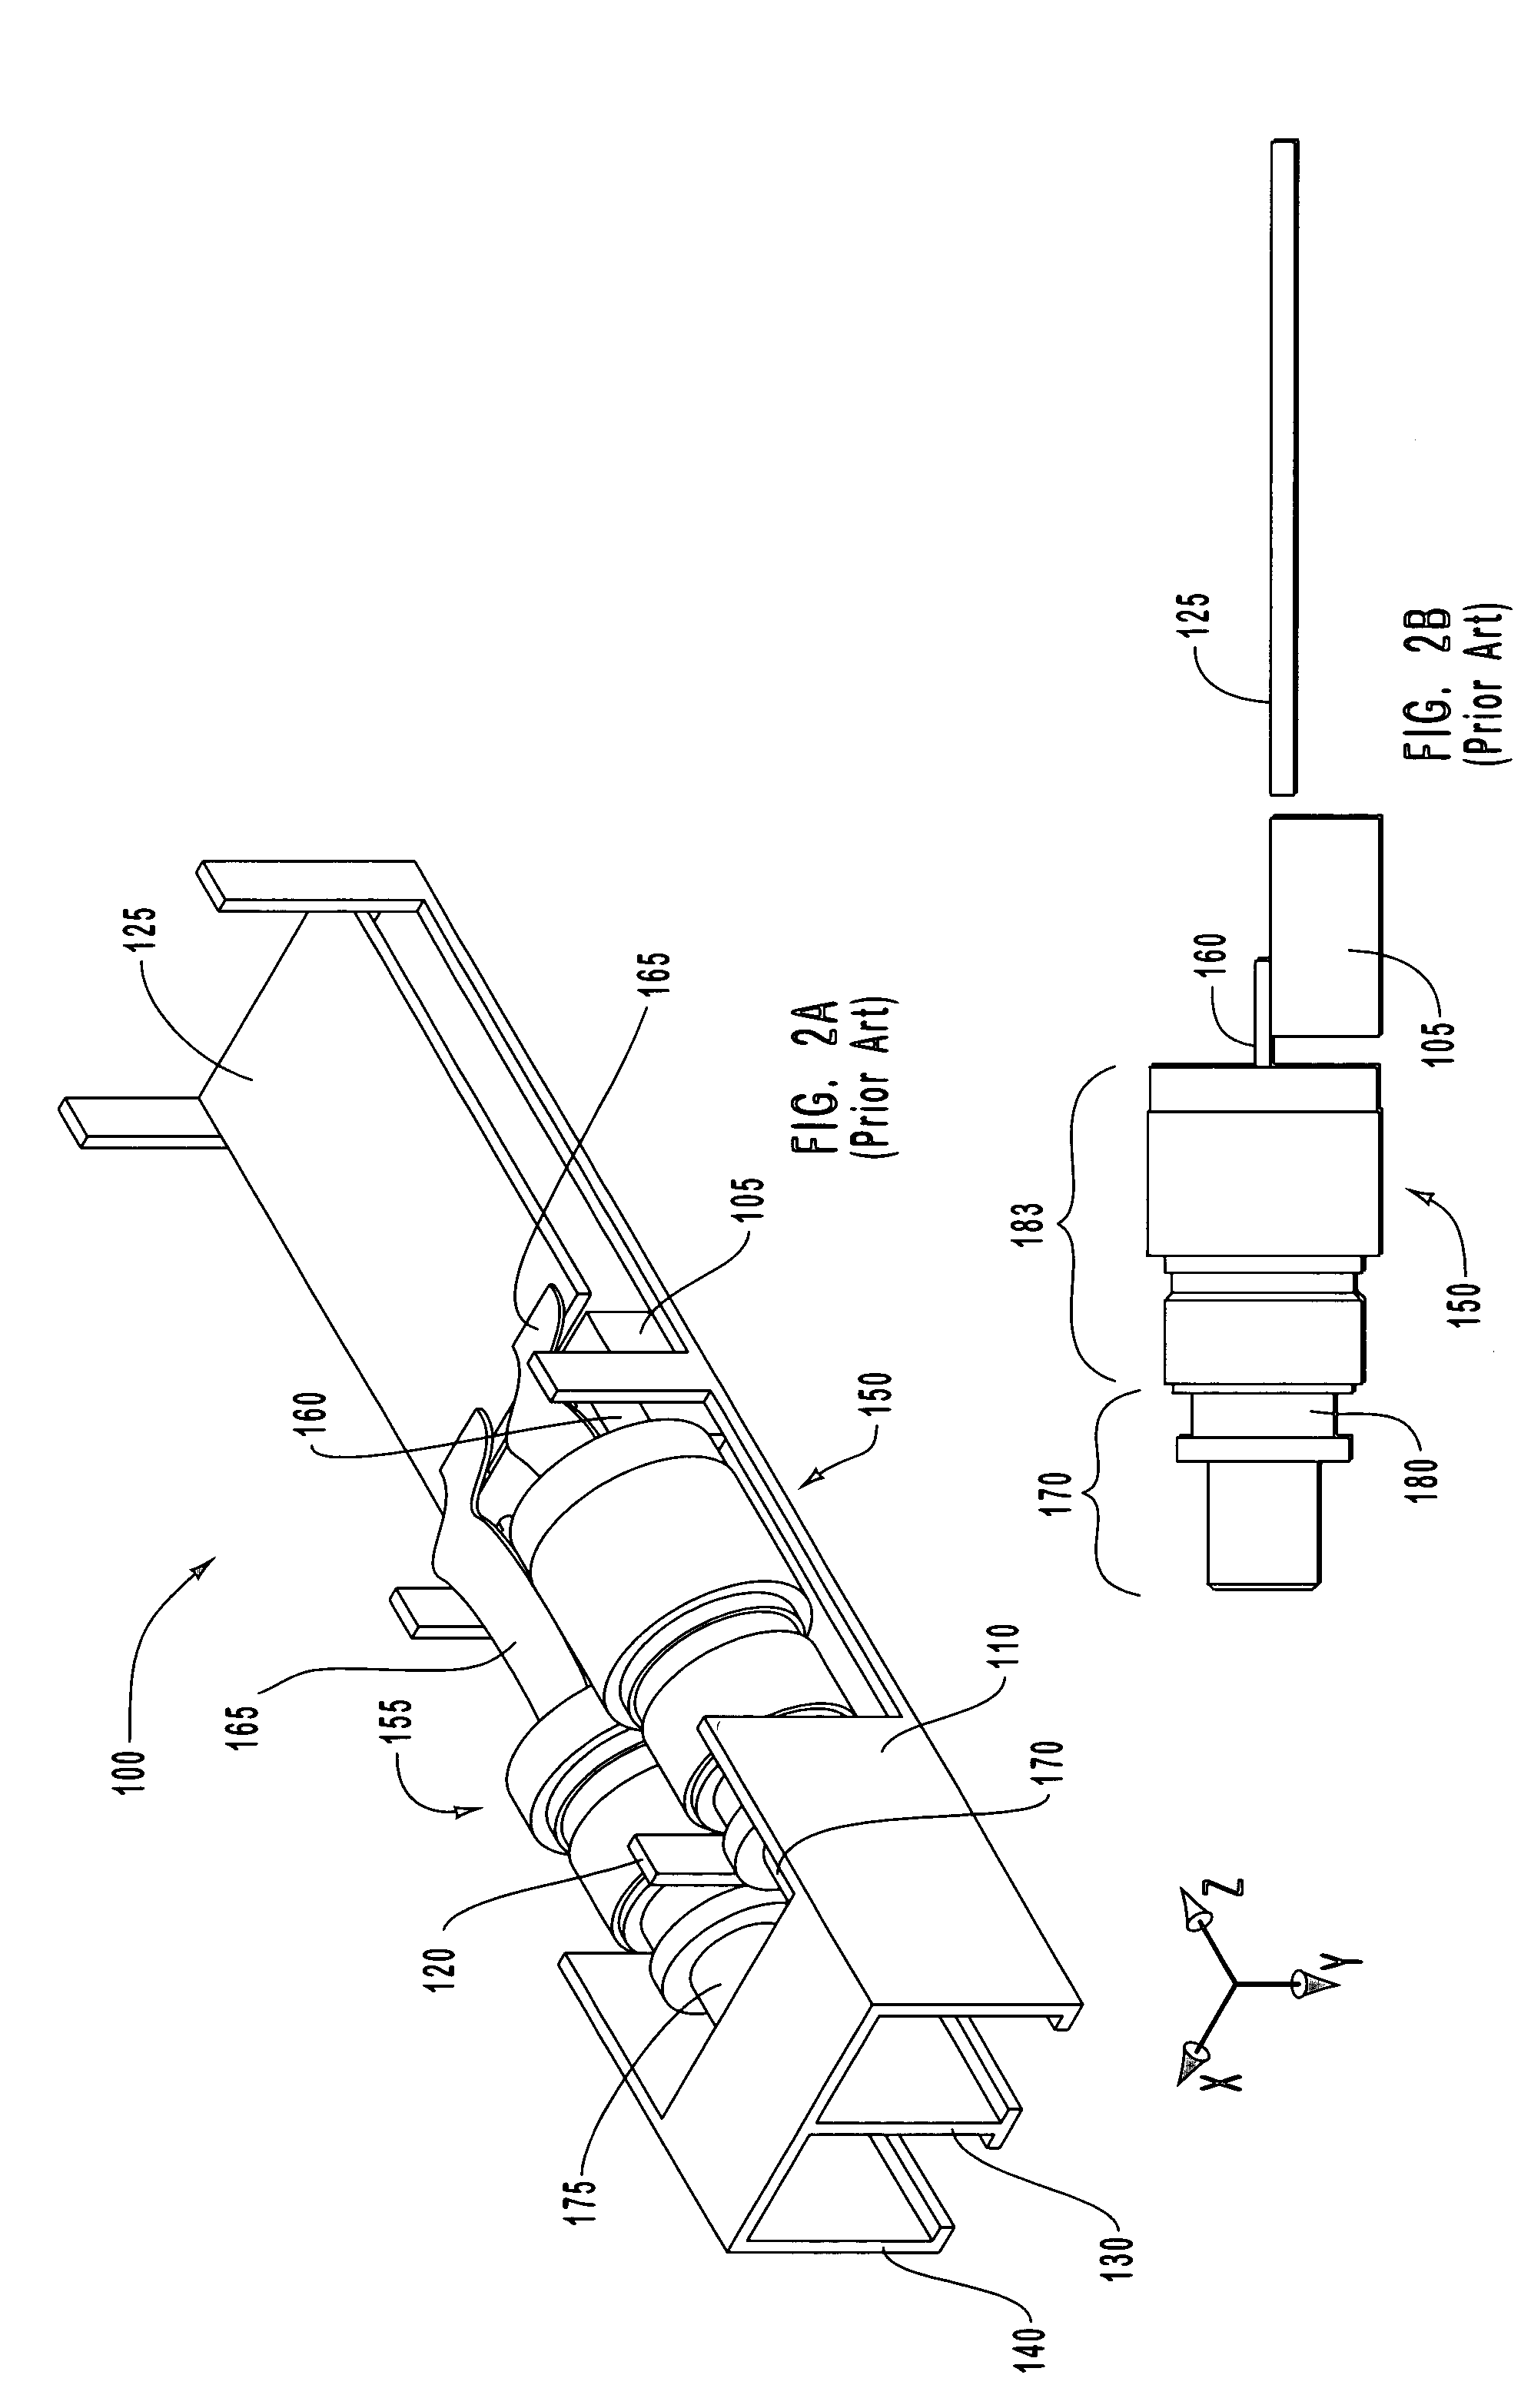 Optical transceiver with variably positioned insert